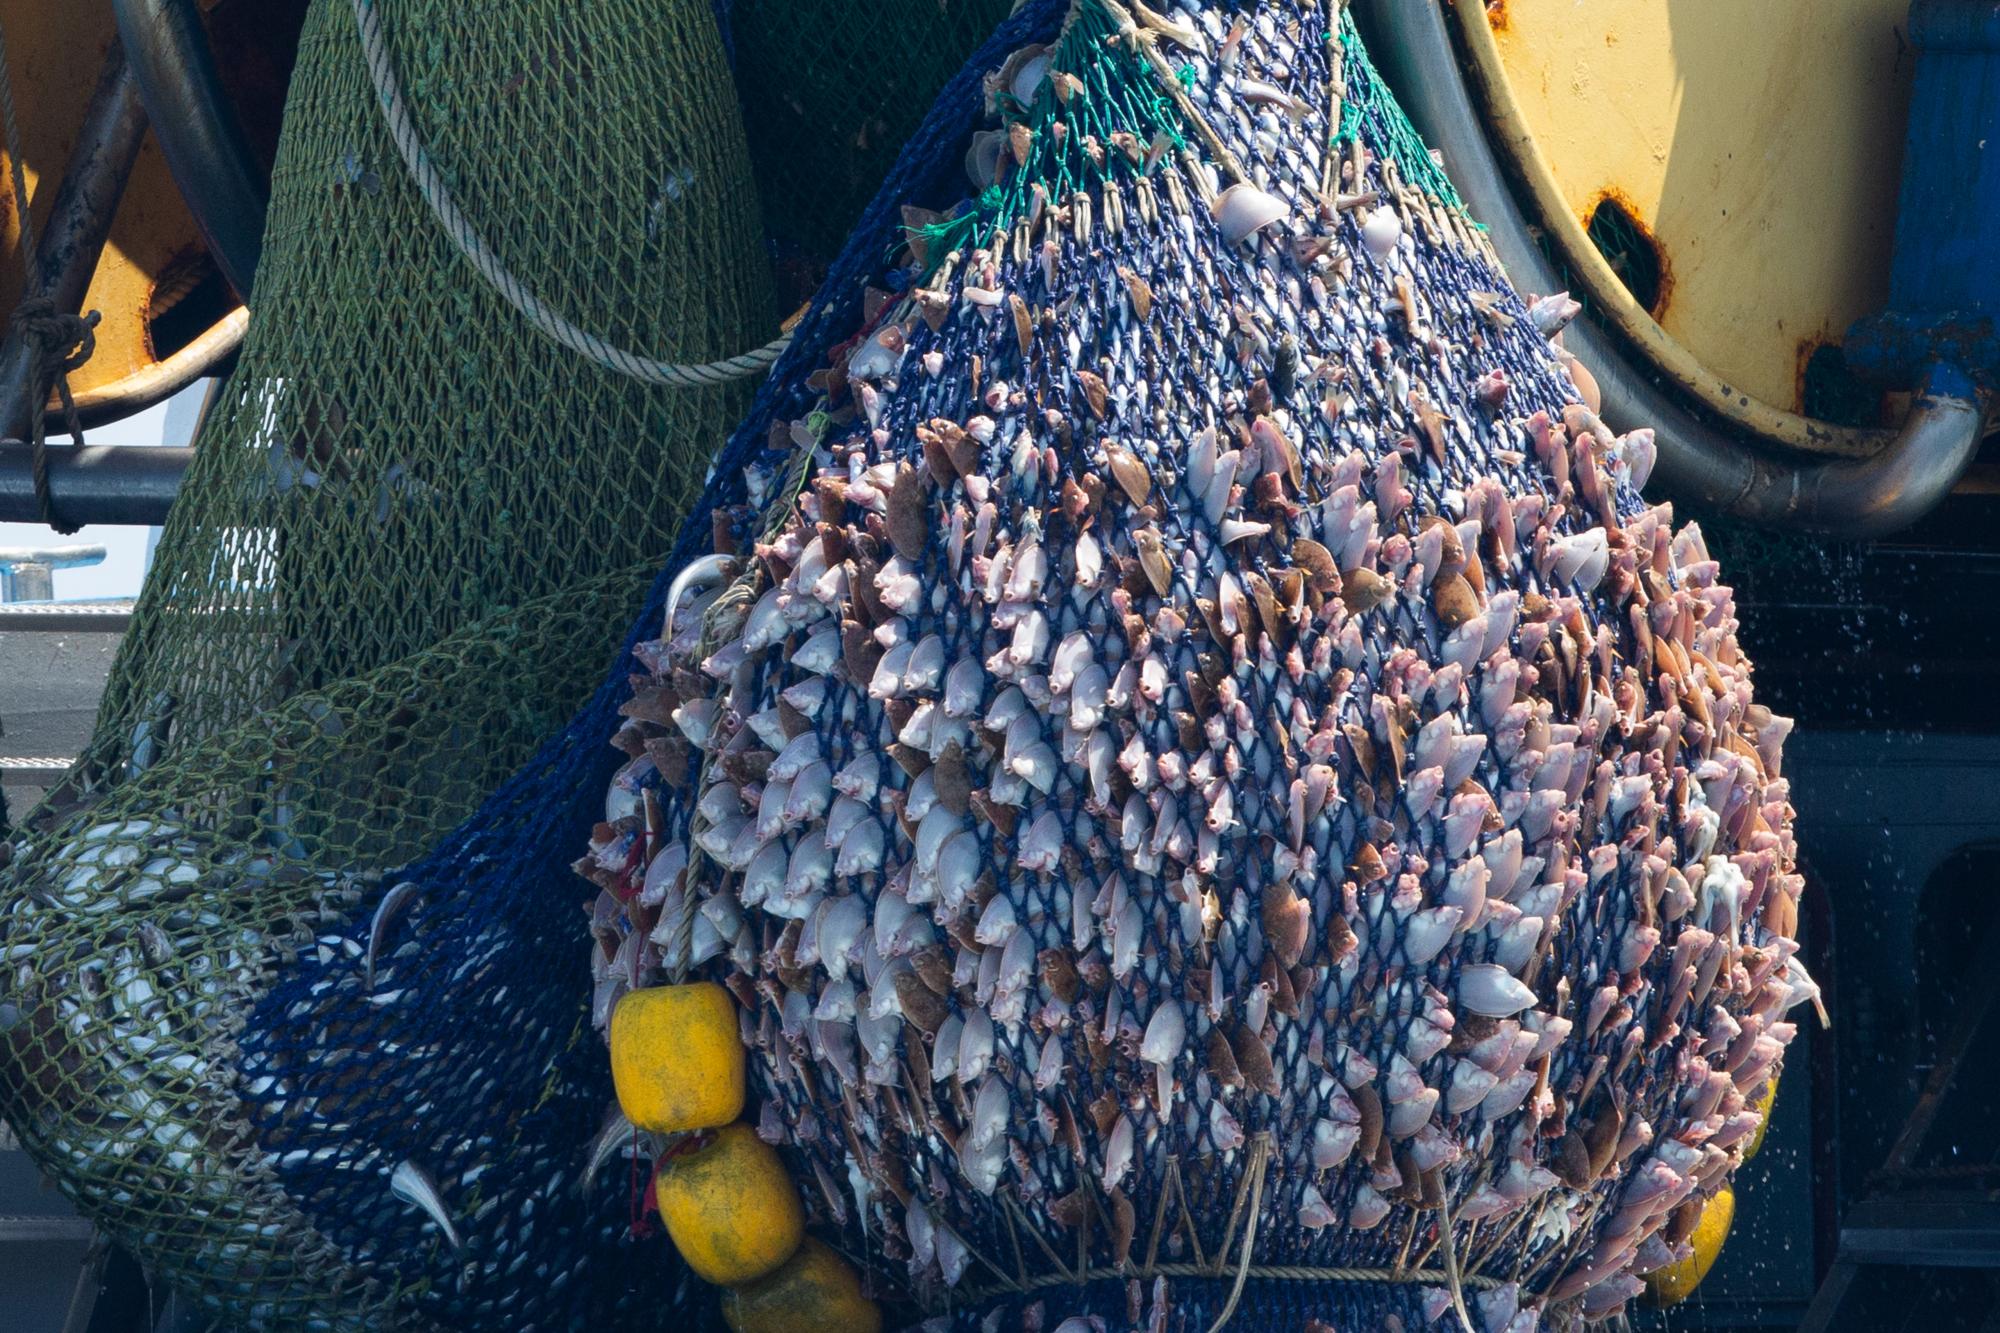 Atlantic overfishing was already a problem. Then Brexit happened